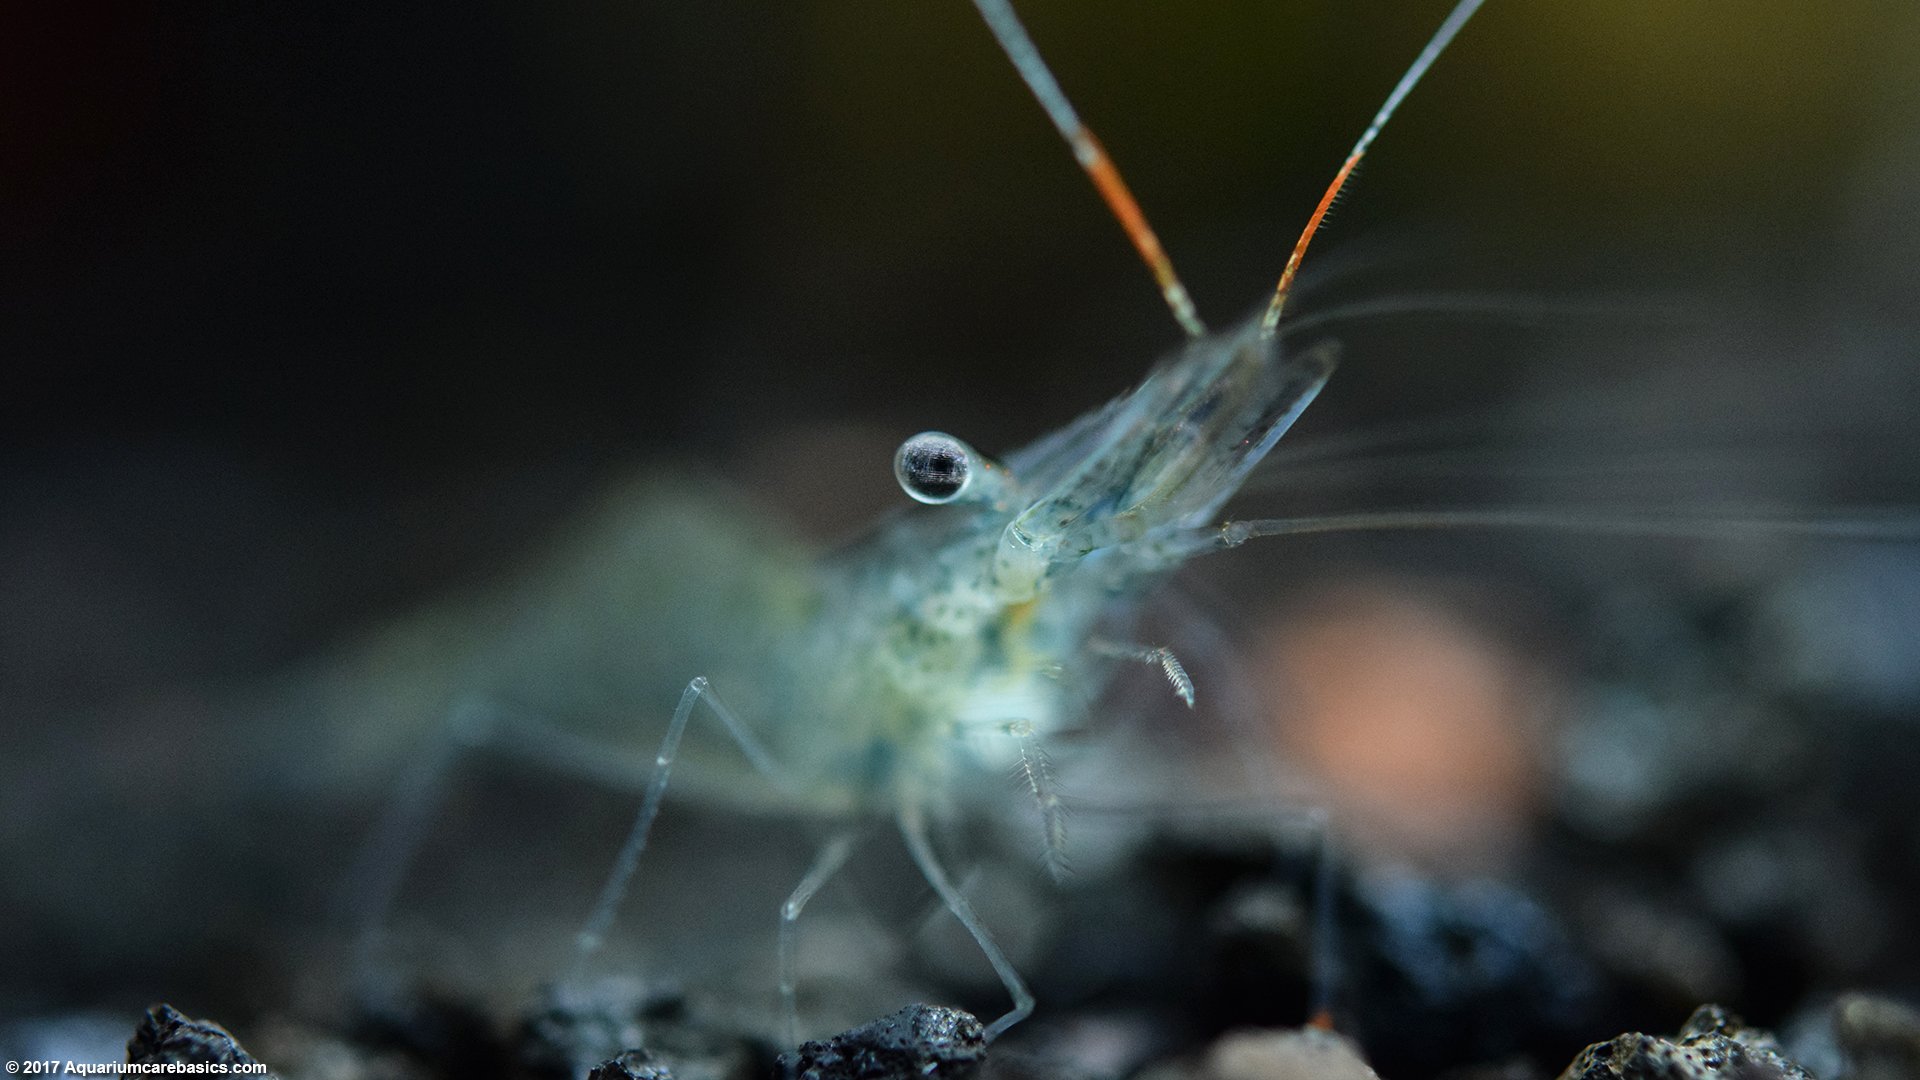 Ghost Shrimp Pictures Gallery.